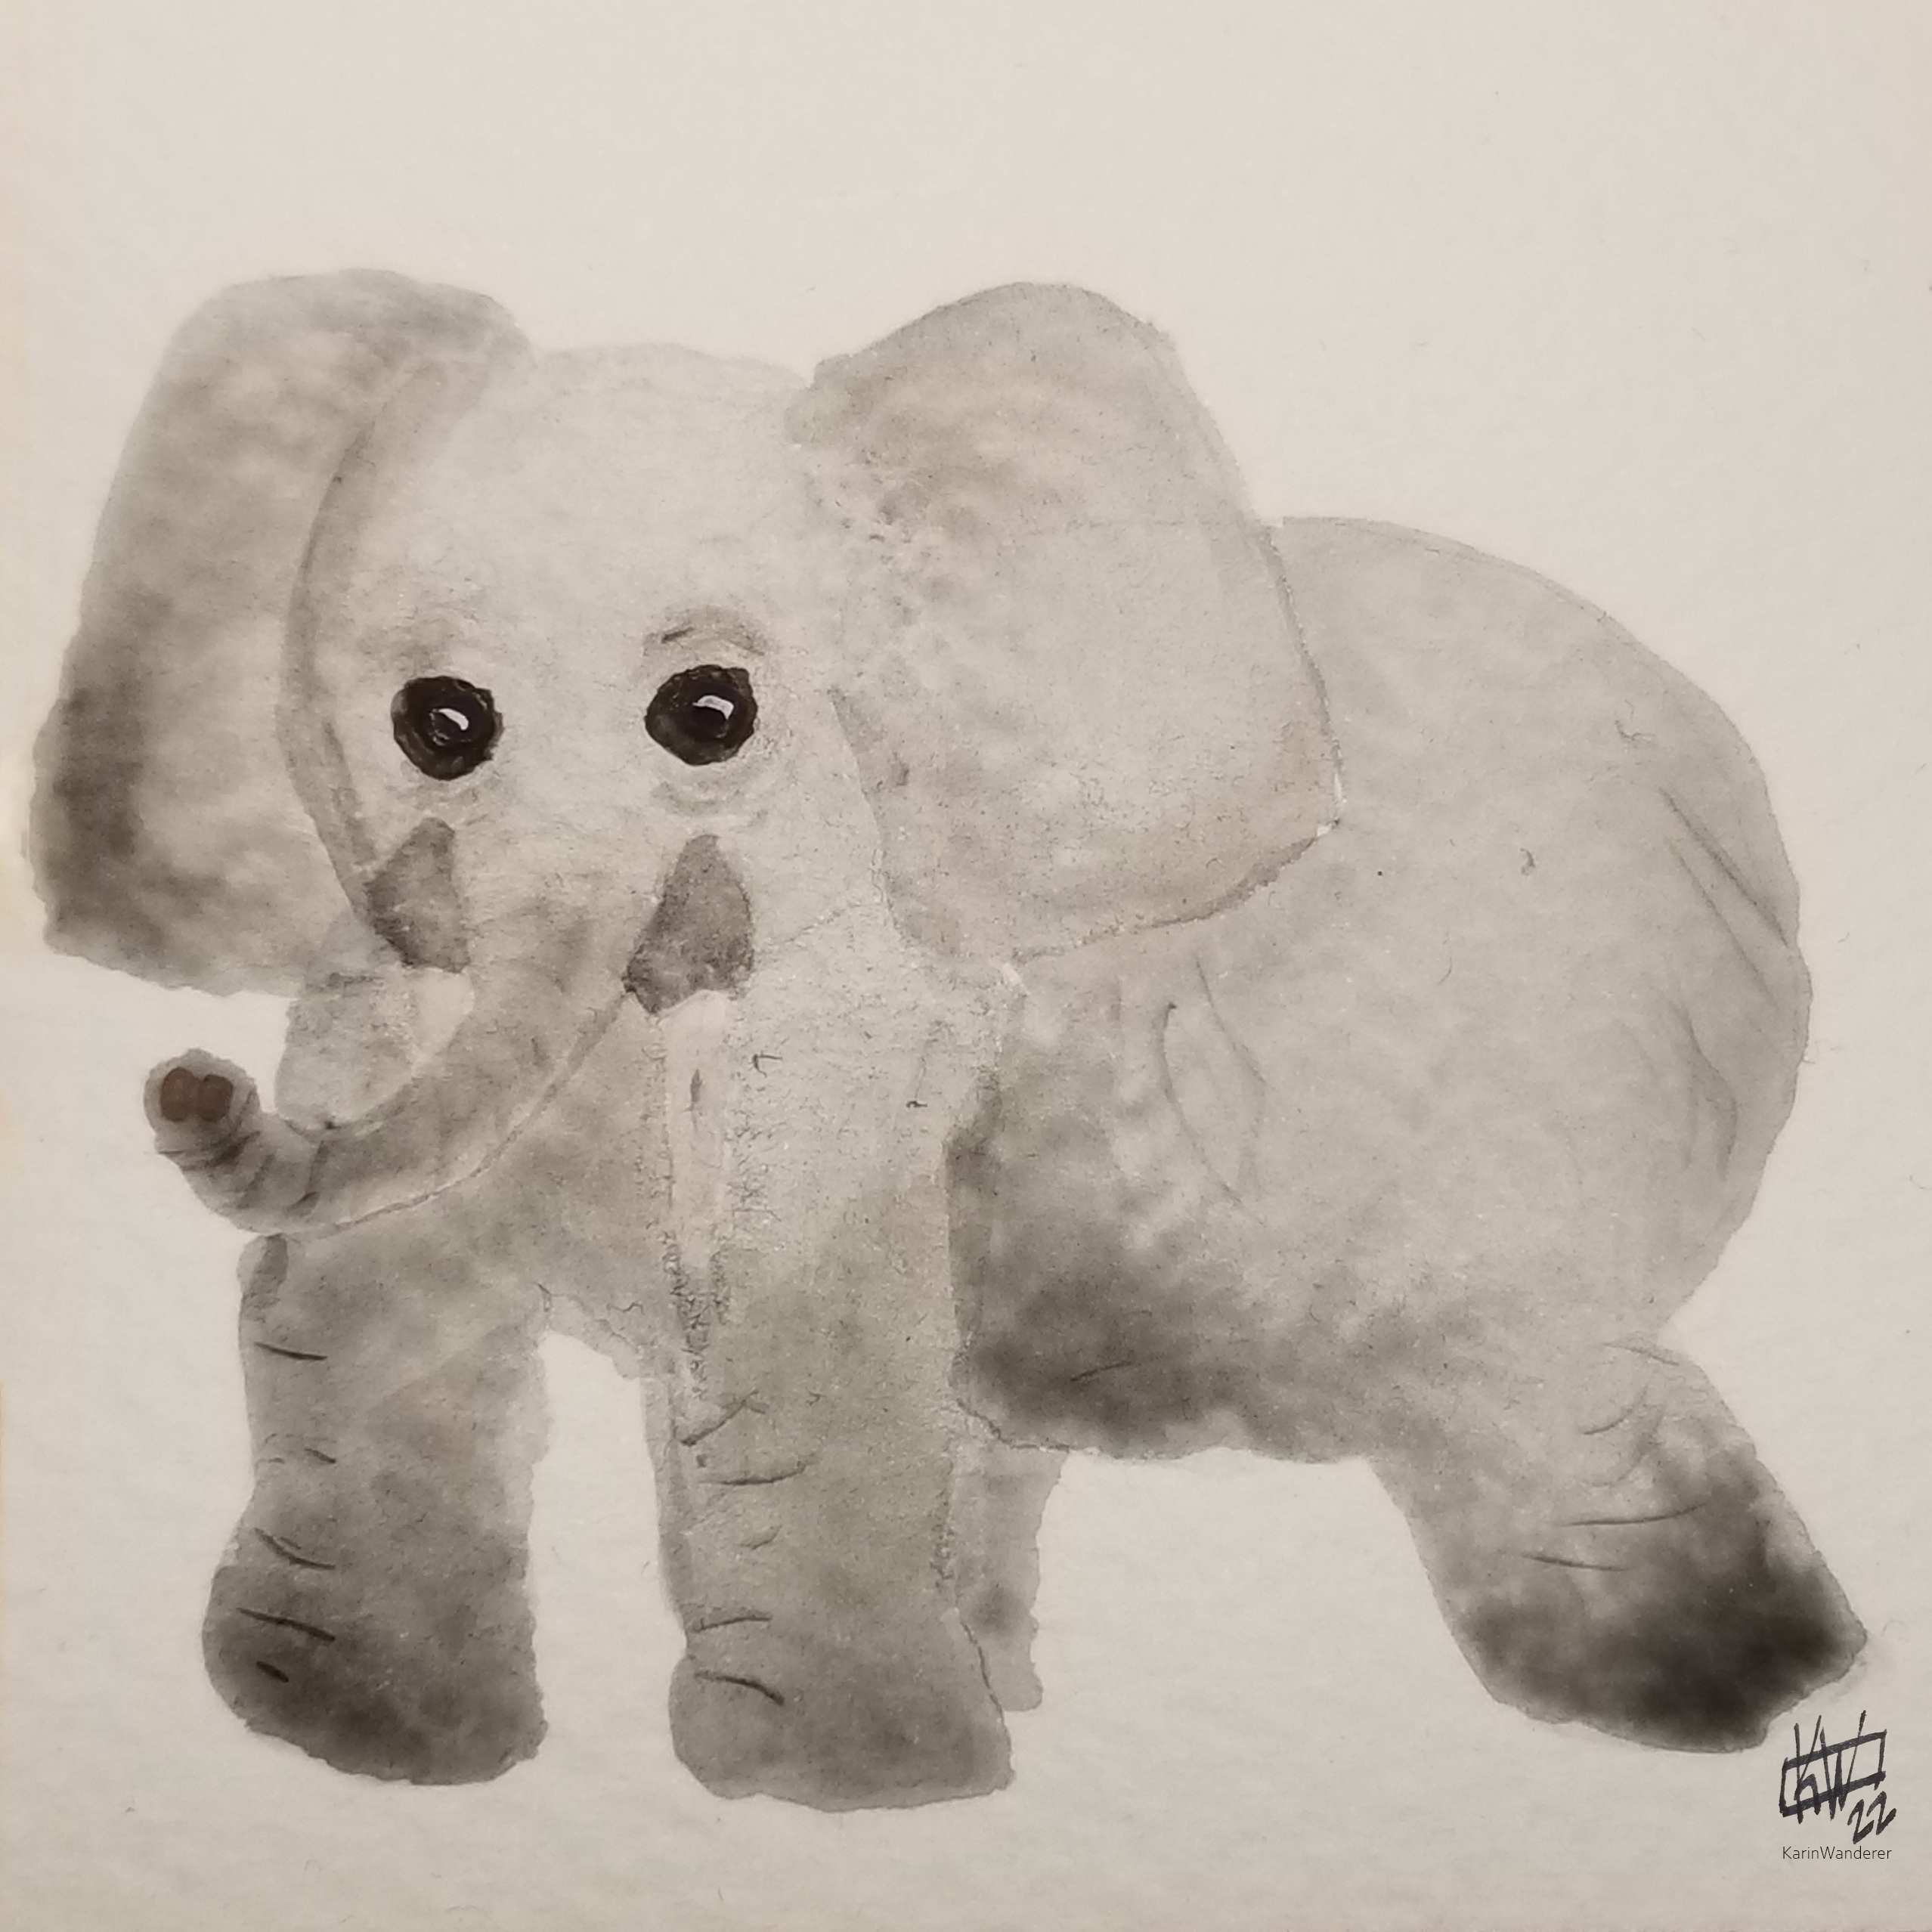 Watercolor forest elephant waving Hello with his trunk.